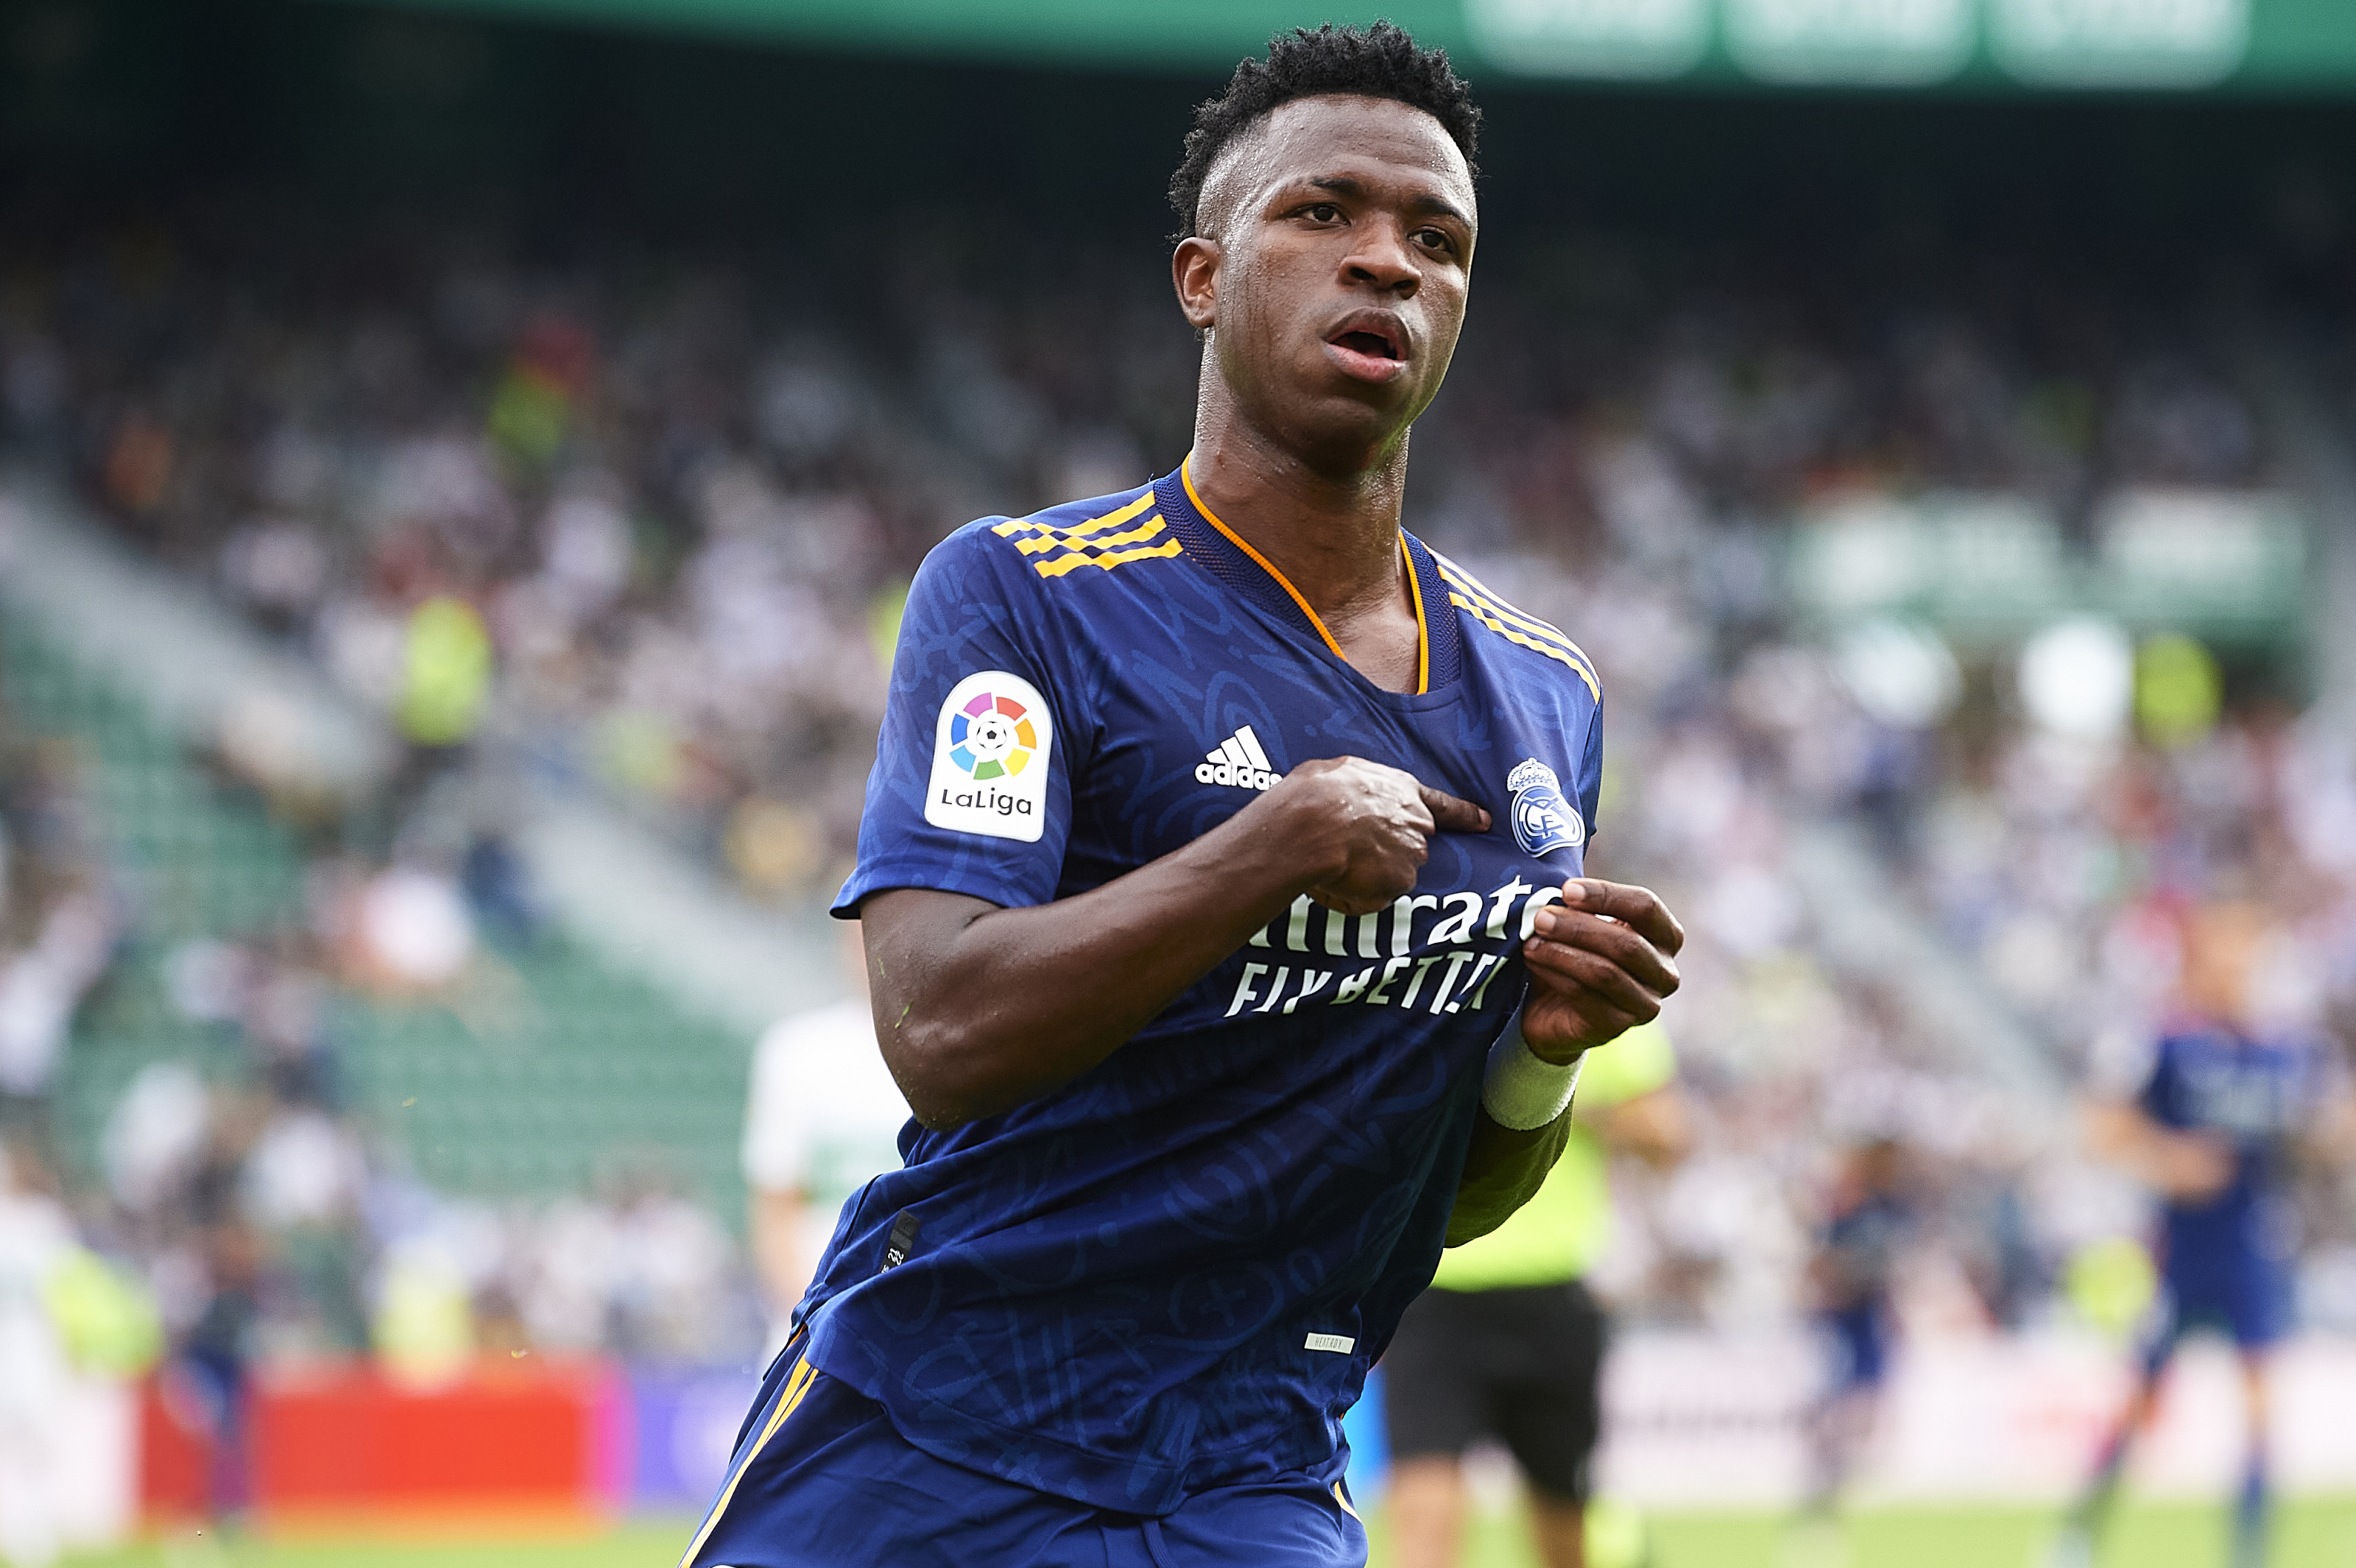 Real Madrid: Where does Vinícius Jr rank among the best in the world?